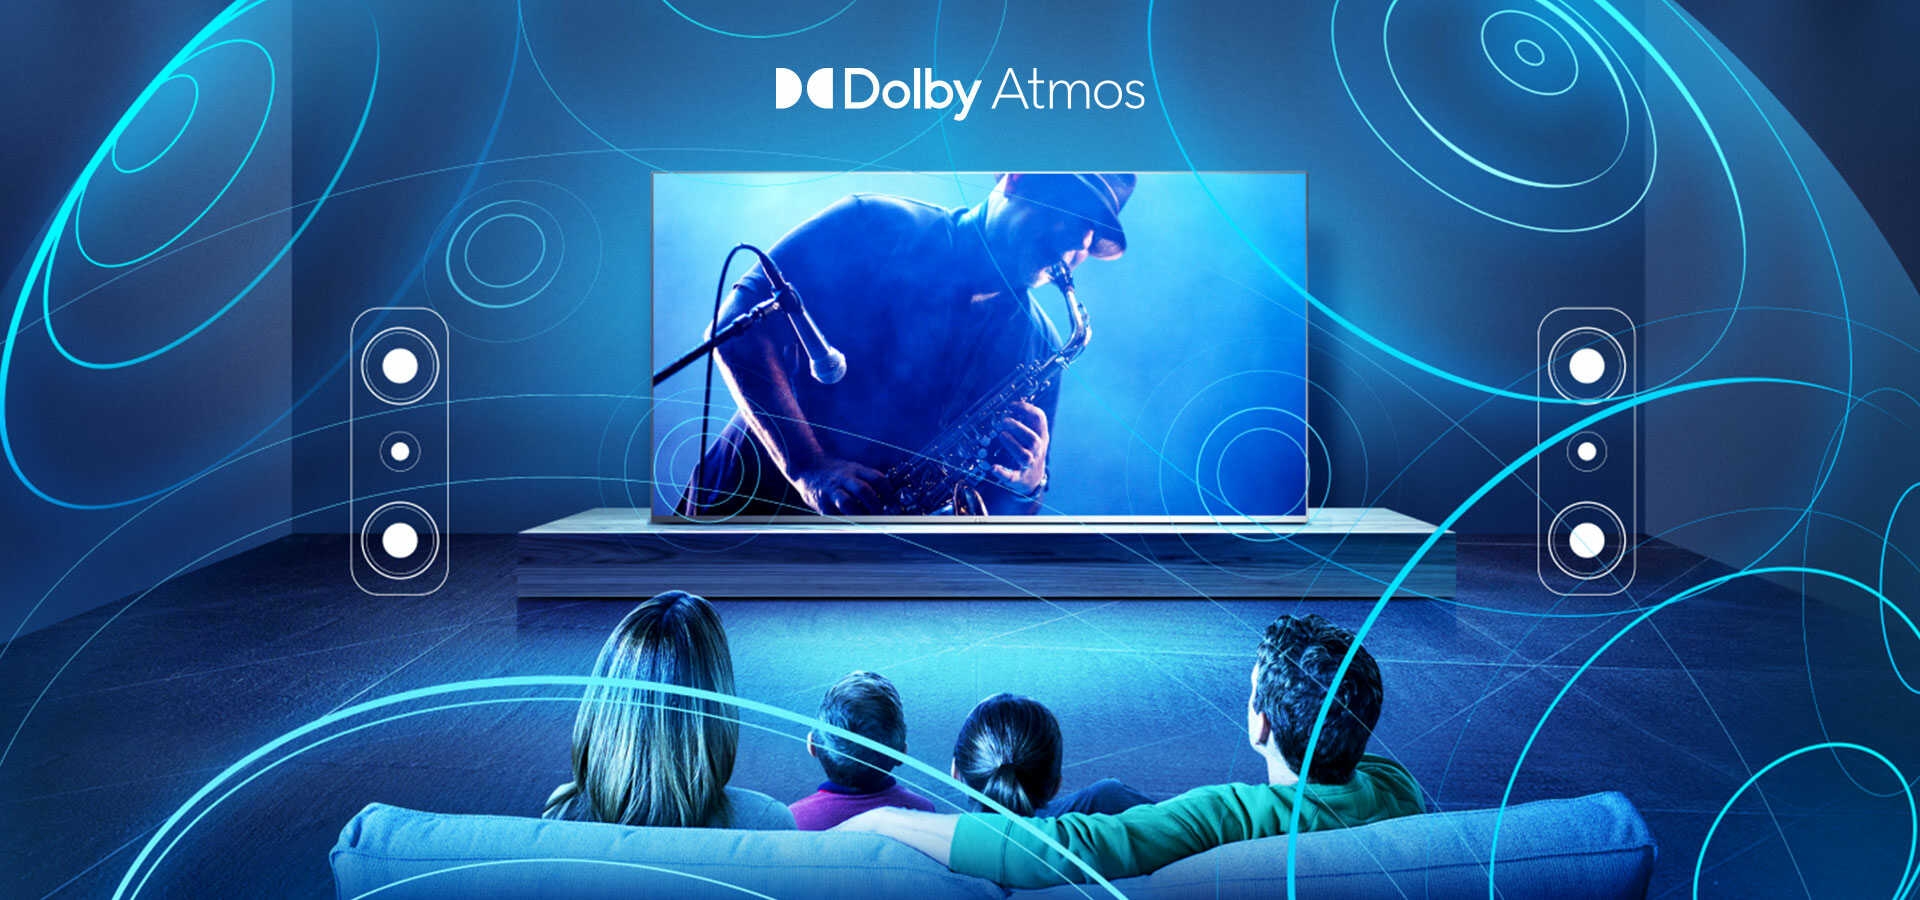 TCL 75'' 4K QLED ULTRA HD ANDROID TV (C725)- Dolby Atmos